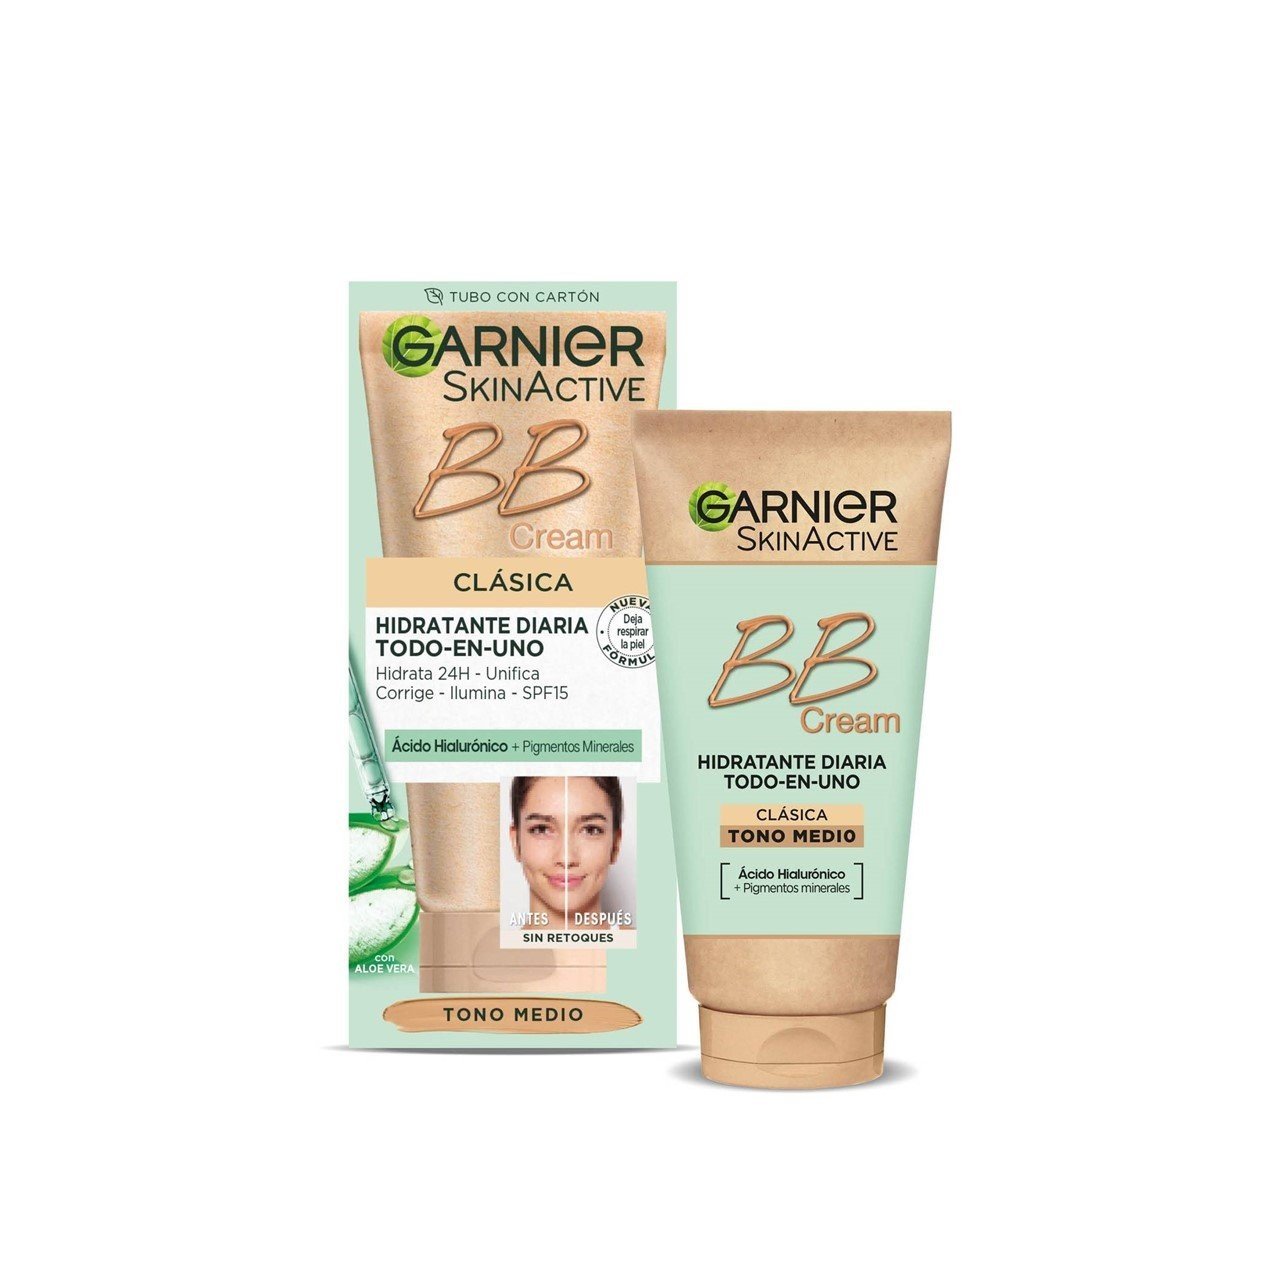 66-Year-Old Shoppers Say Erborian's BB Cream Is Great for Mature Skin